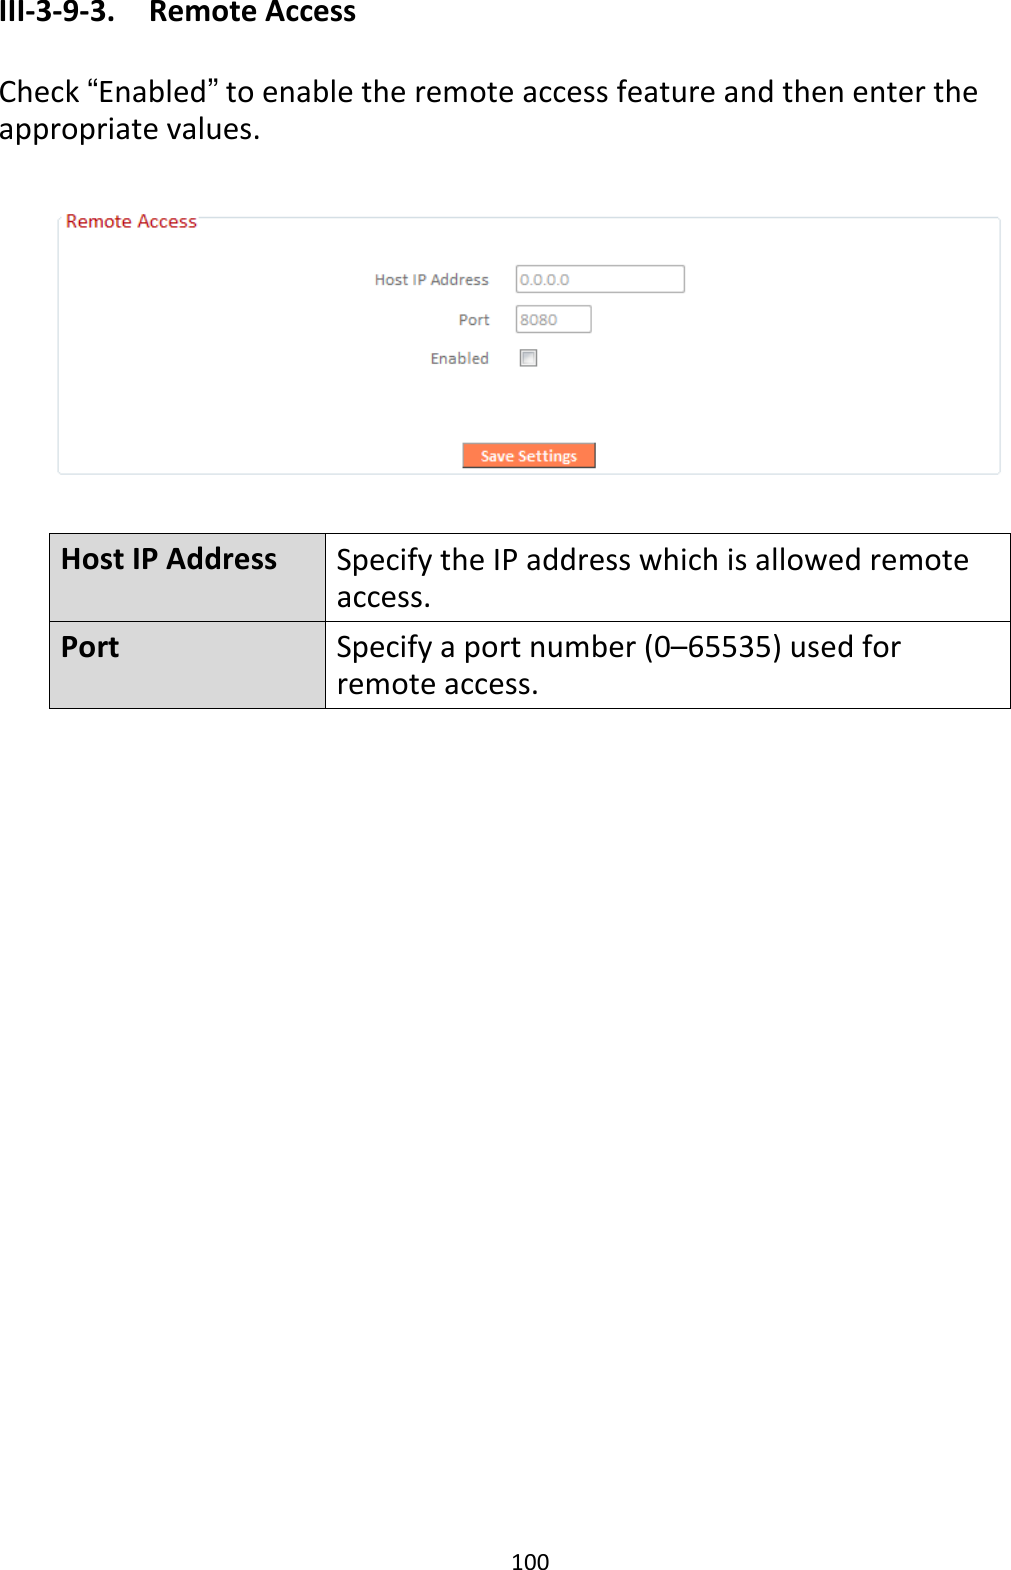 100 III-3-9-3.  Remote Access  Check “Enabled” to enable the remote access feature and then enter the appropriate values.    Host IP Address  Specify the IP address which is allowed remote access. Port  Specify a port number (0–65535) used for remote access.  